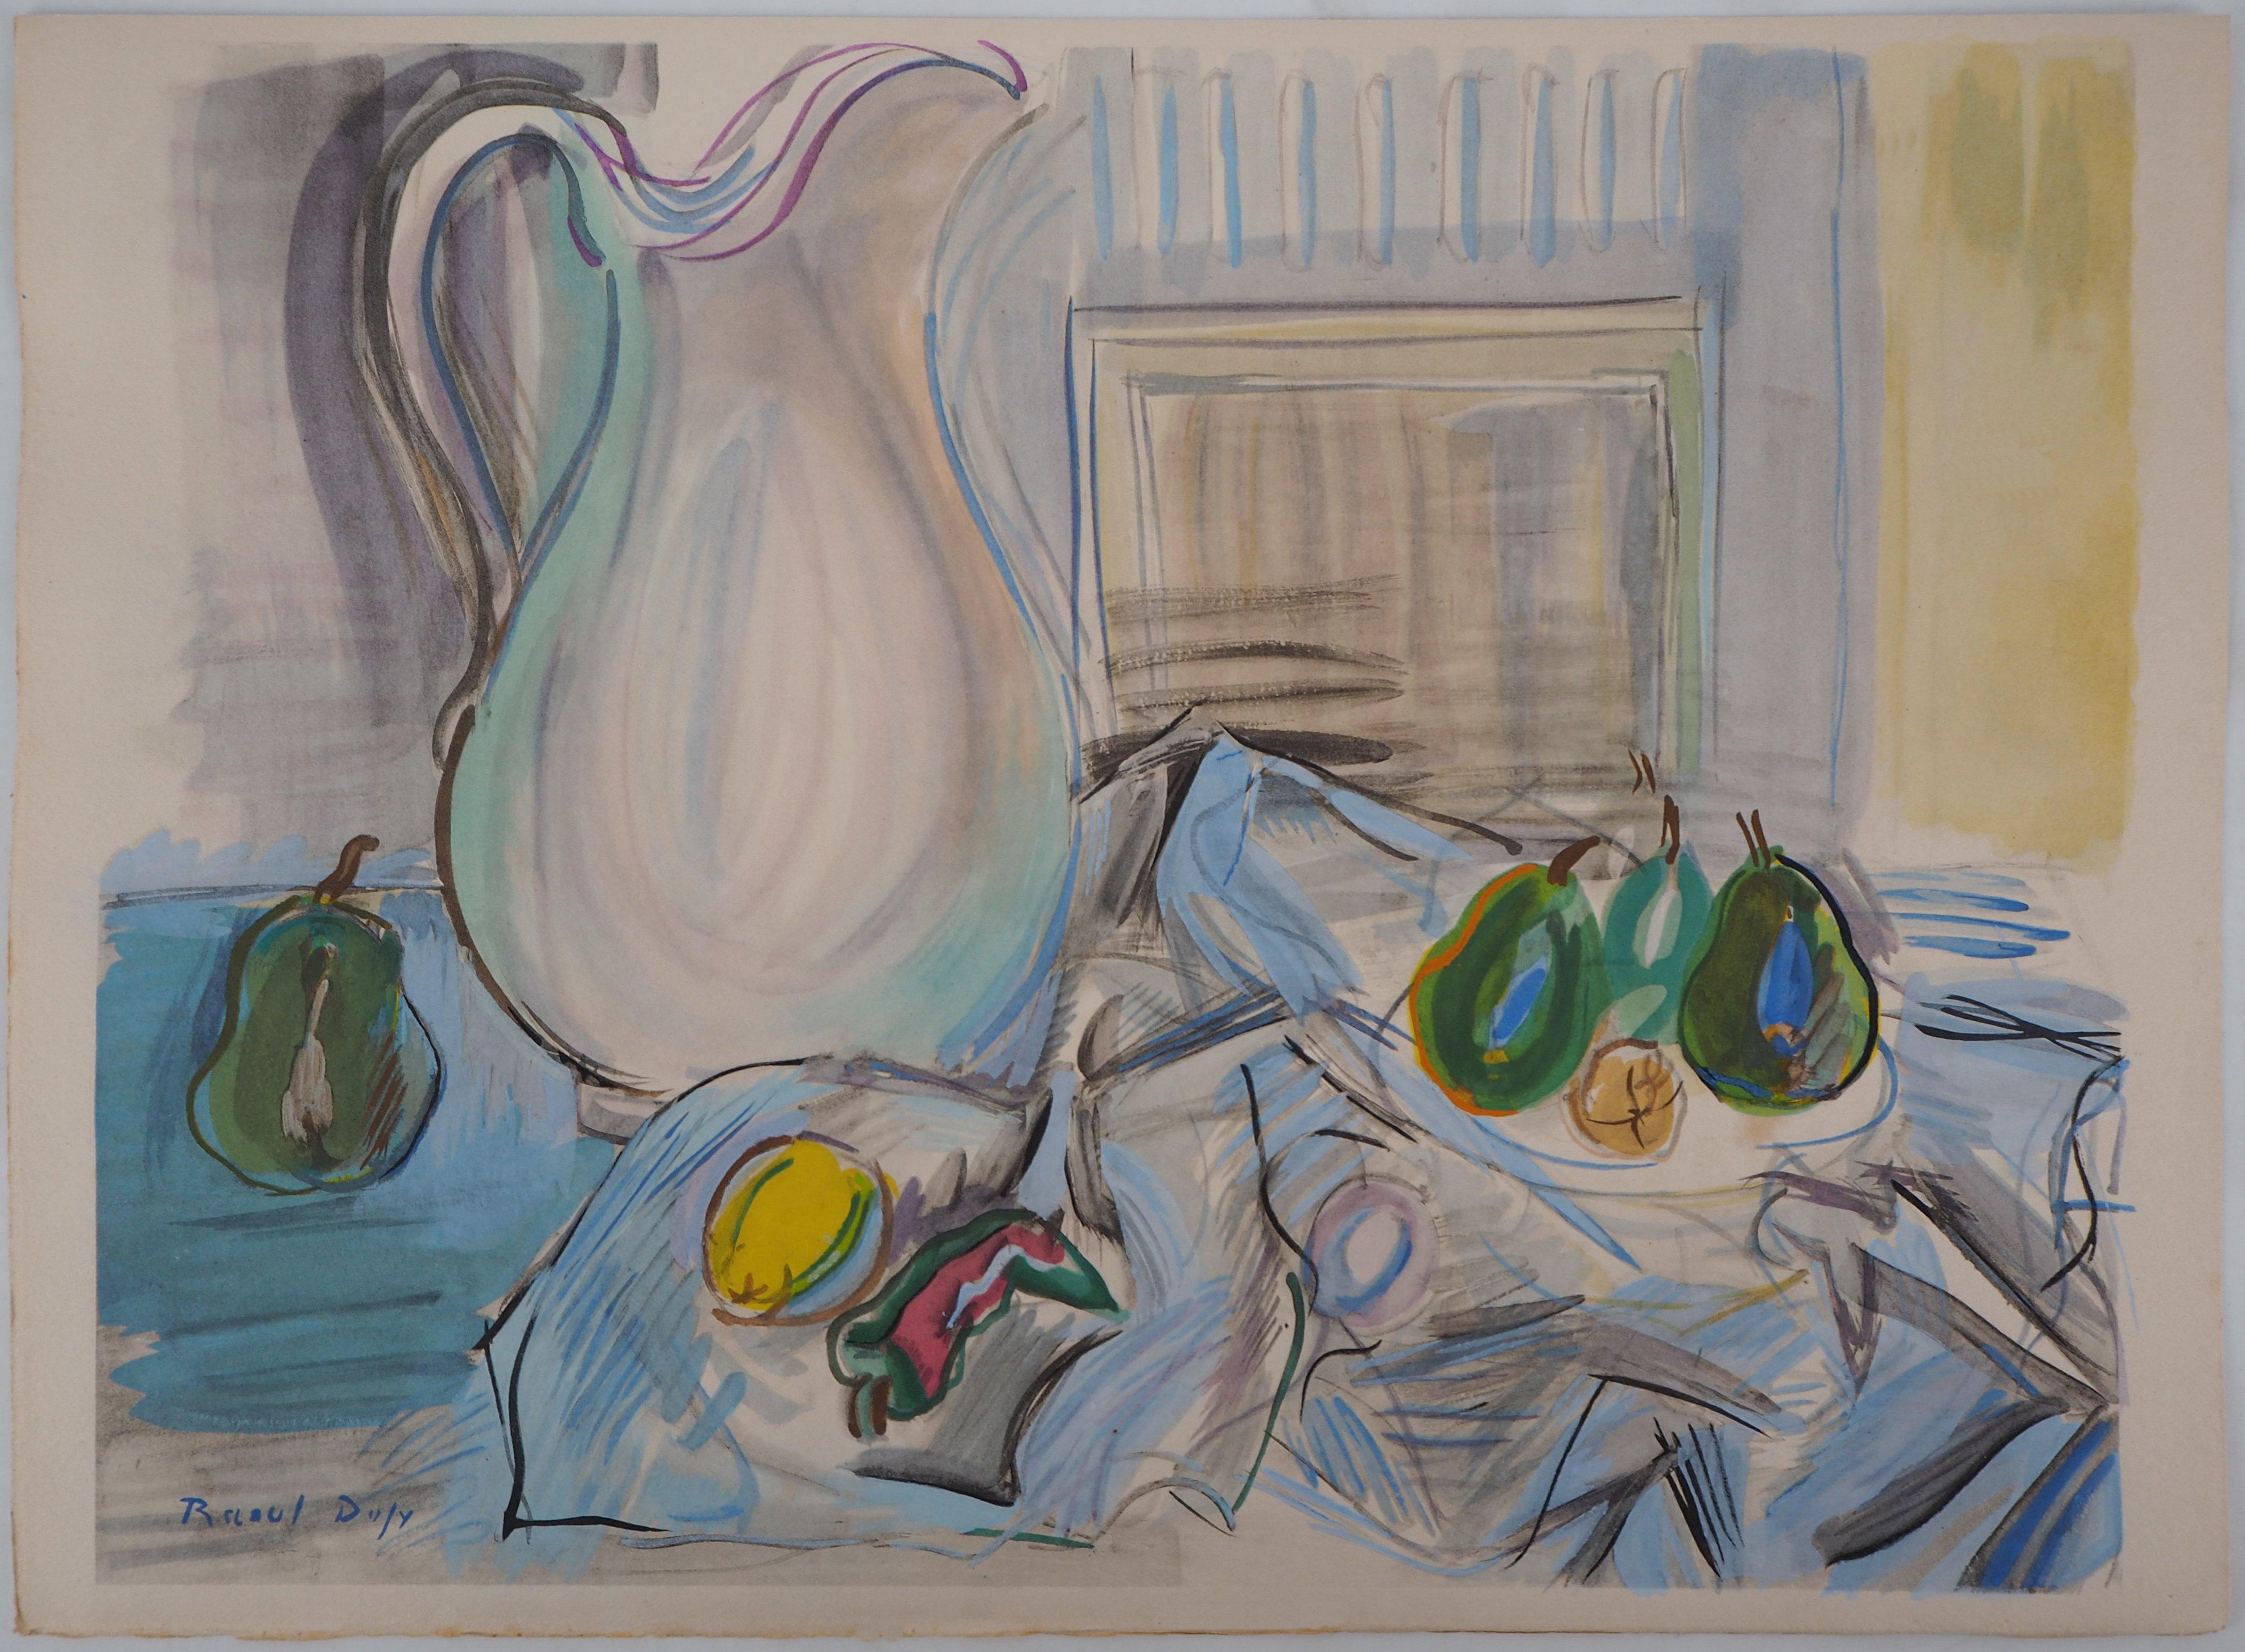 Raoul Dufy Figurative Print - Still Life with White Pot and Pears - Original Lithograph